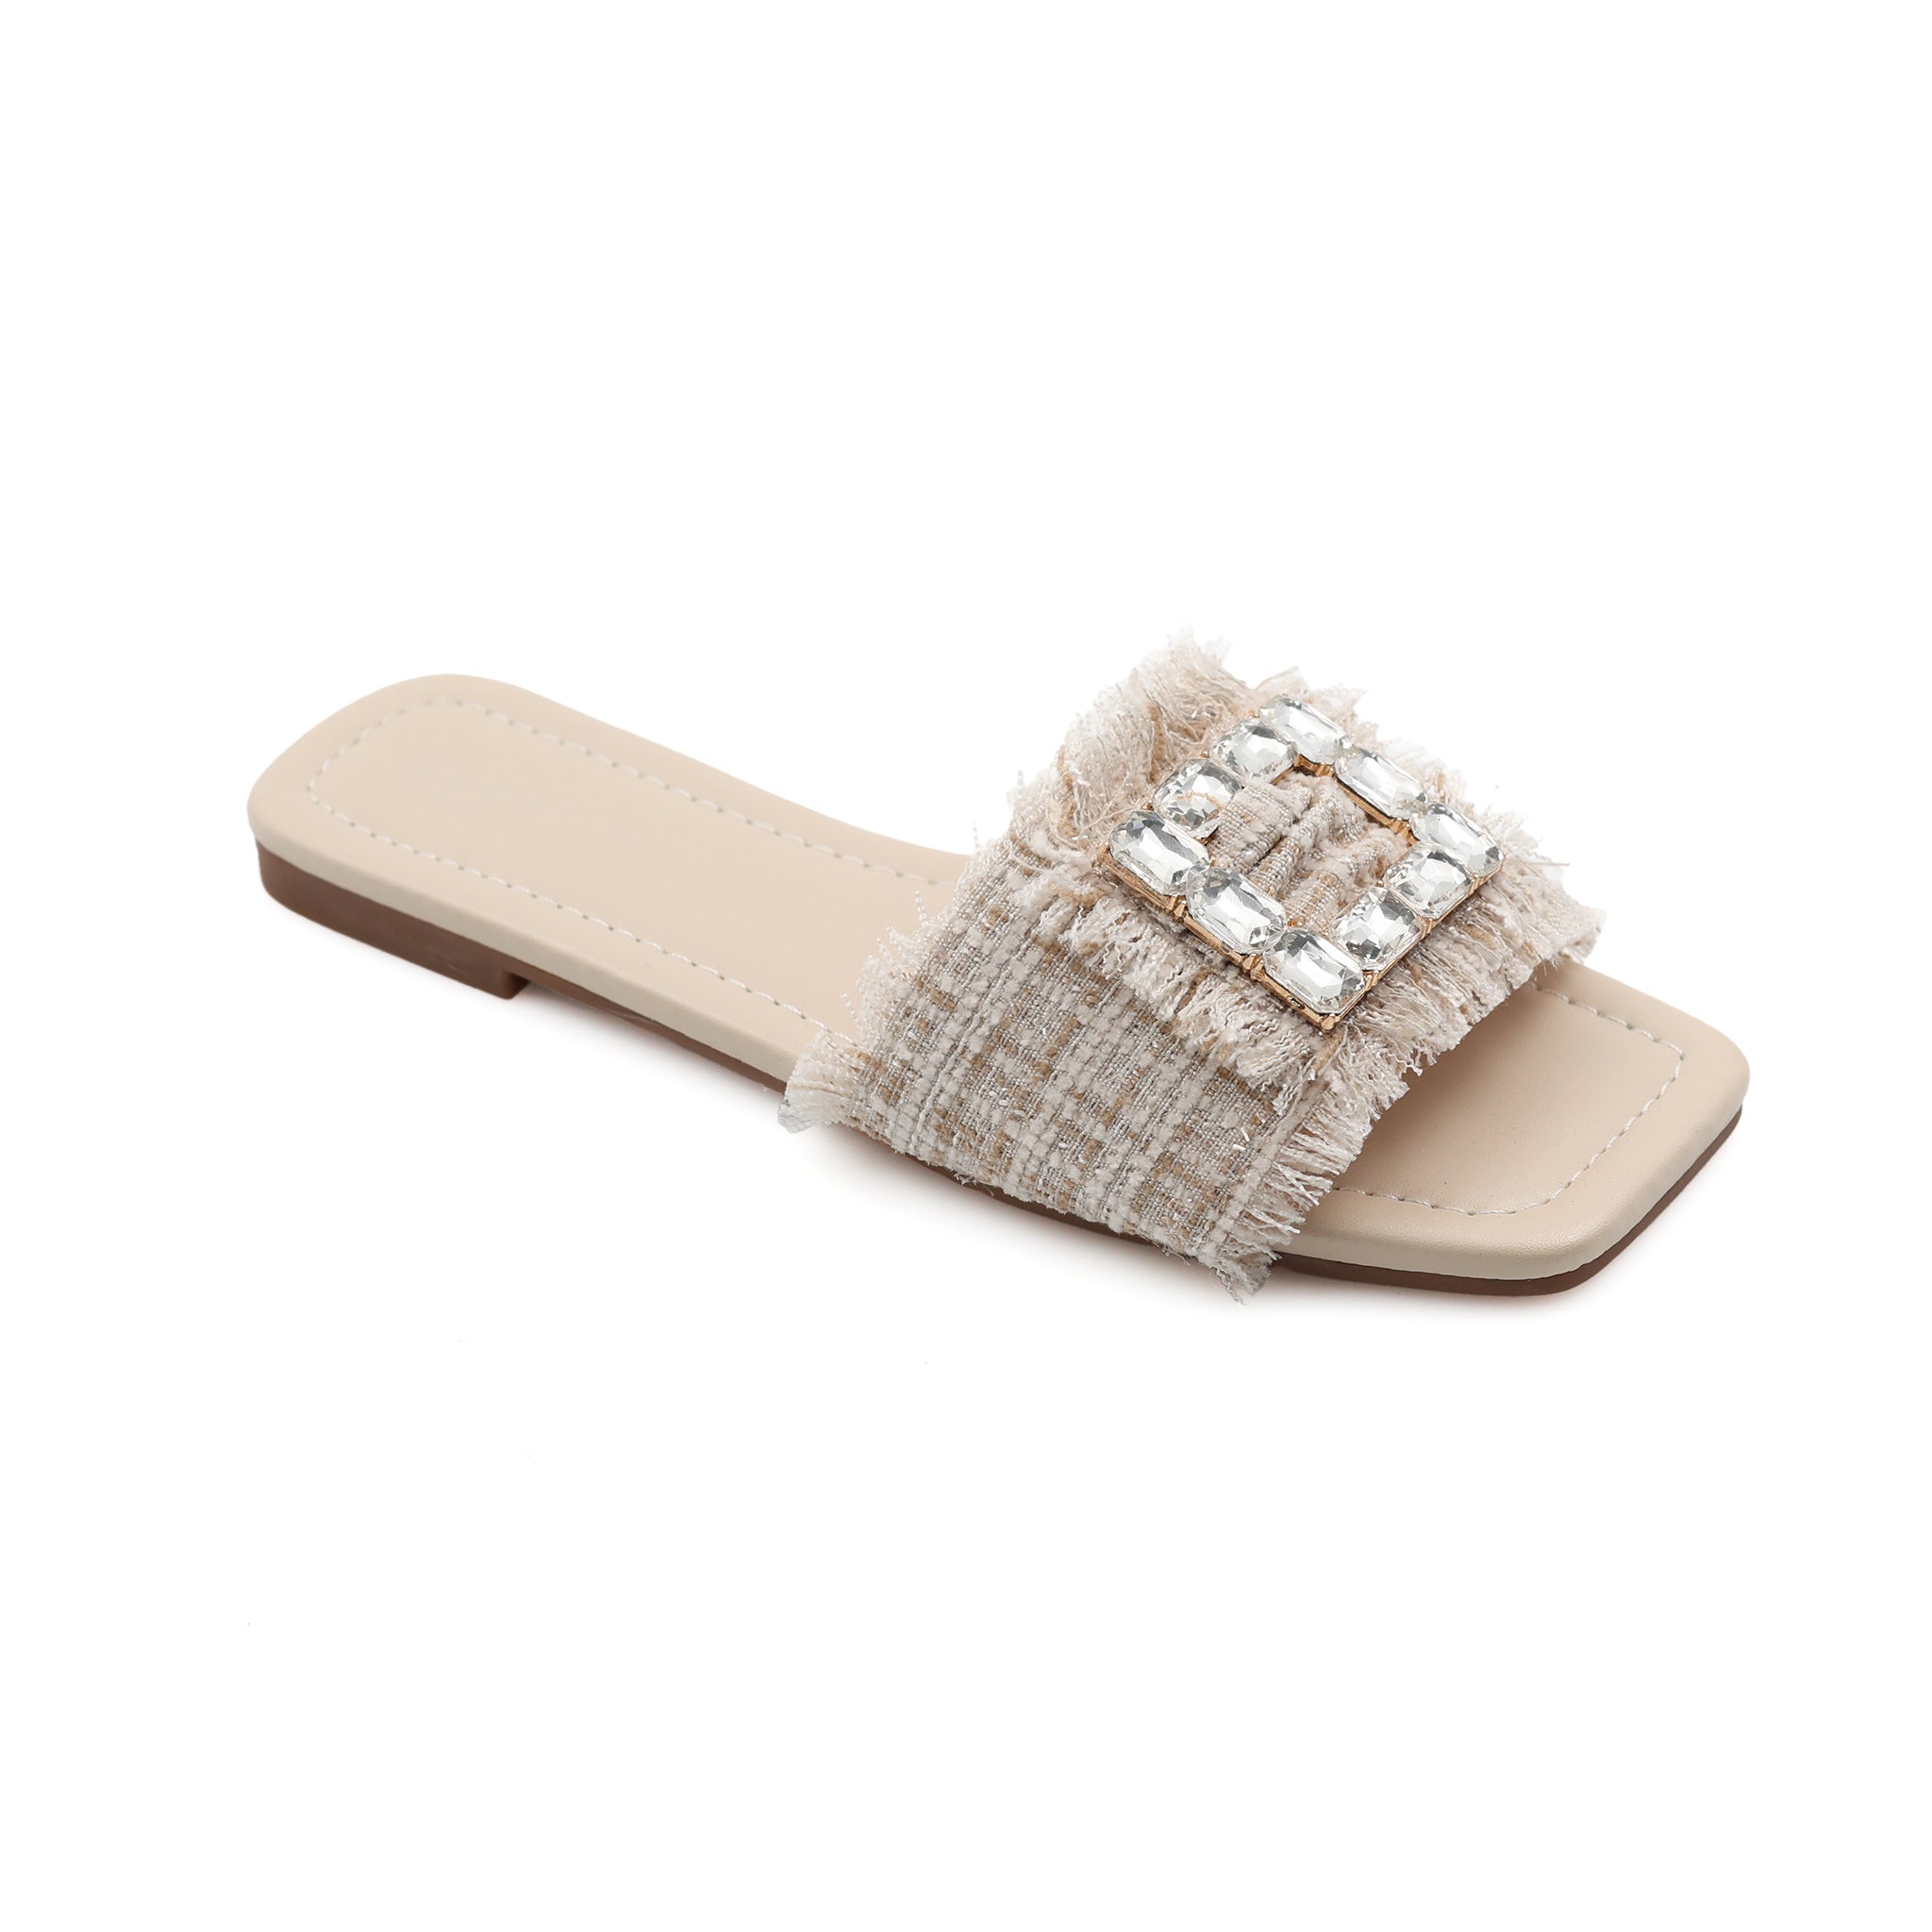 Leather Slipper Strass Decorated